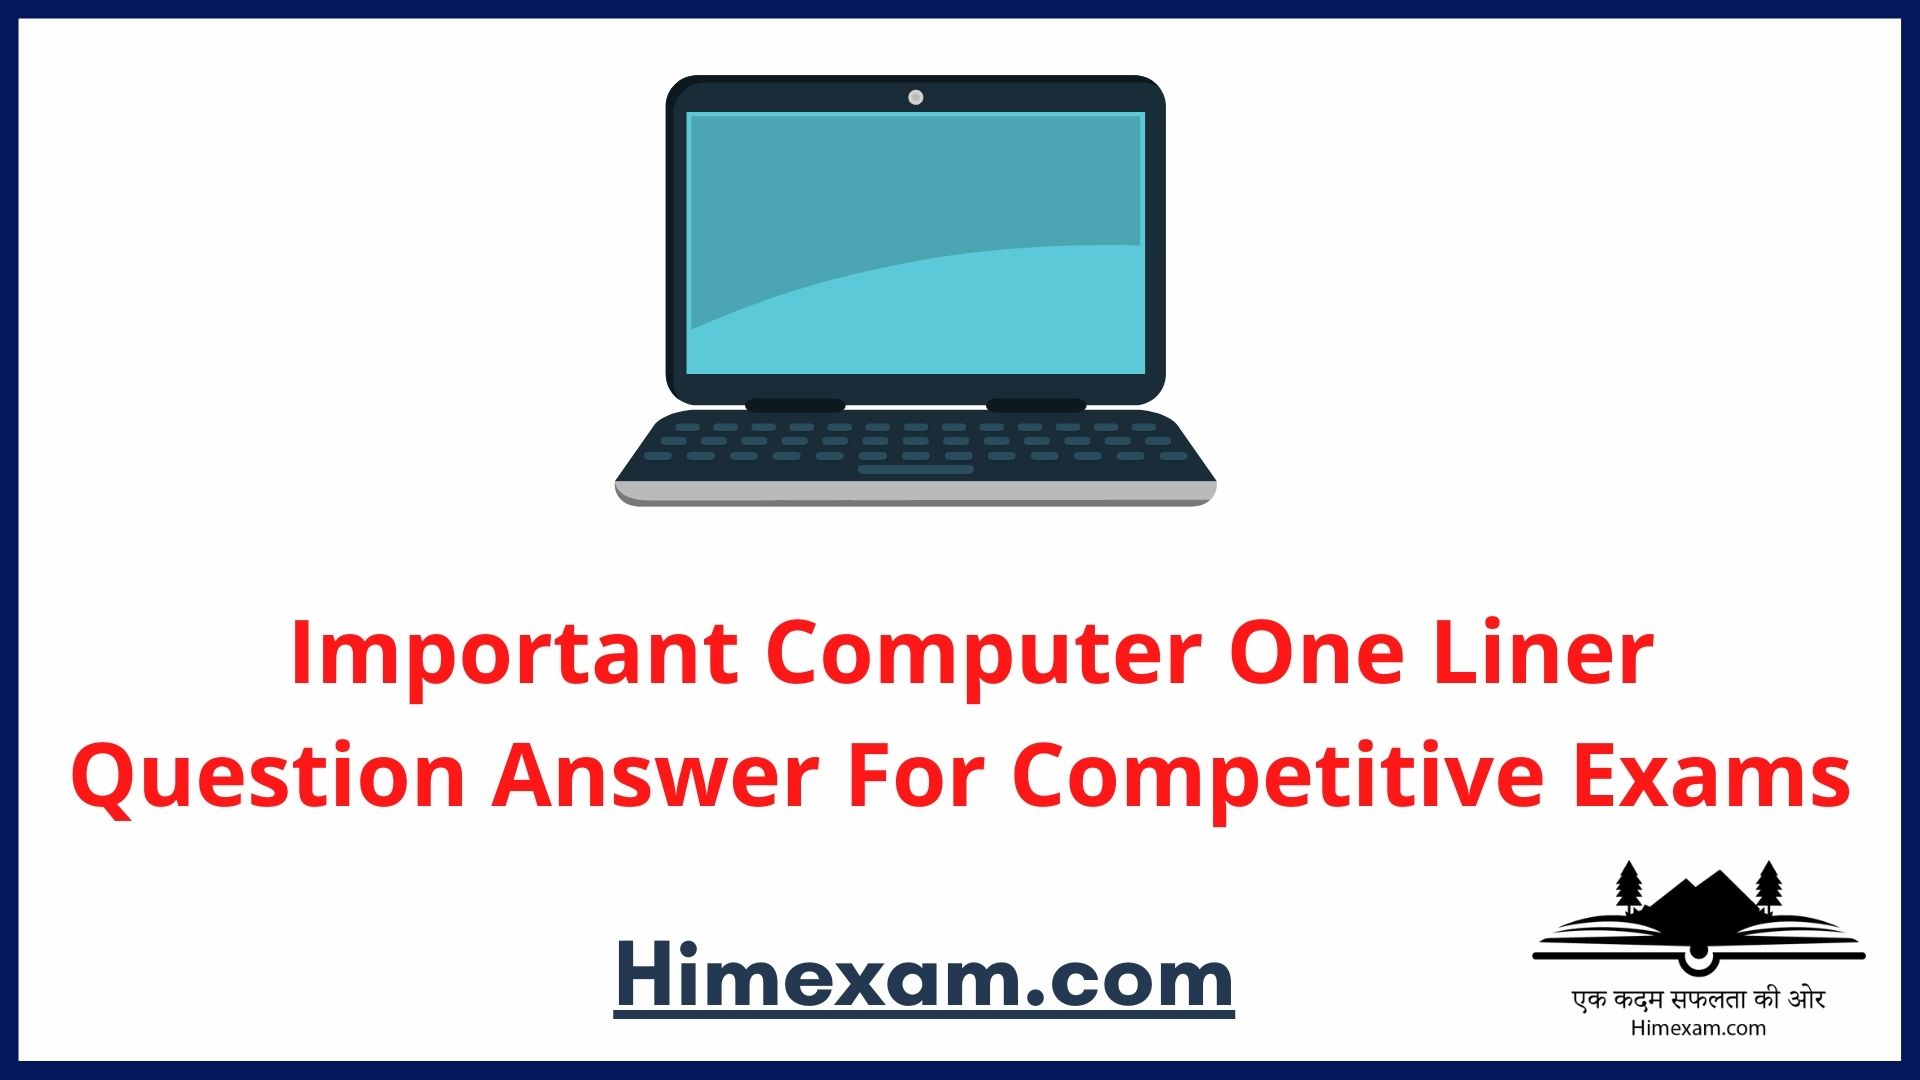 Important Computer One Liner Question Answer For Competitive Exams